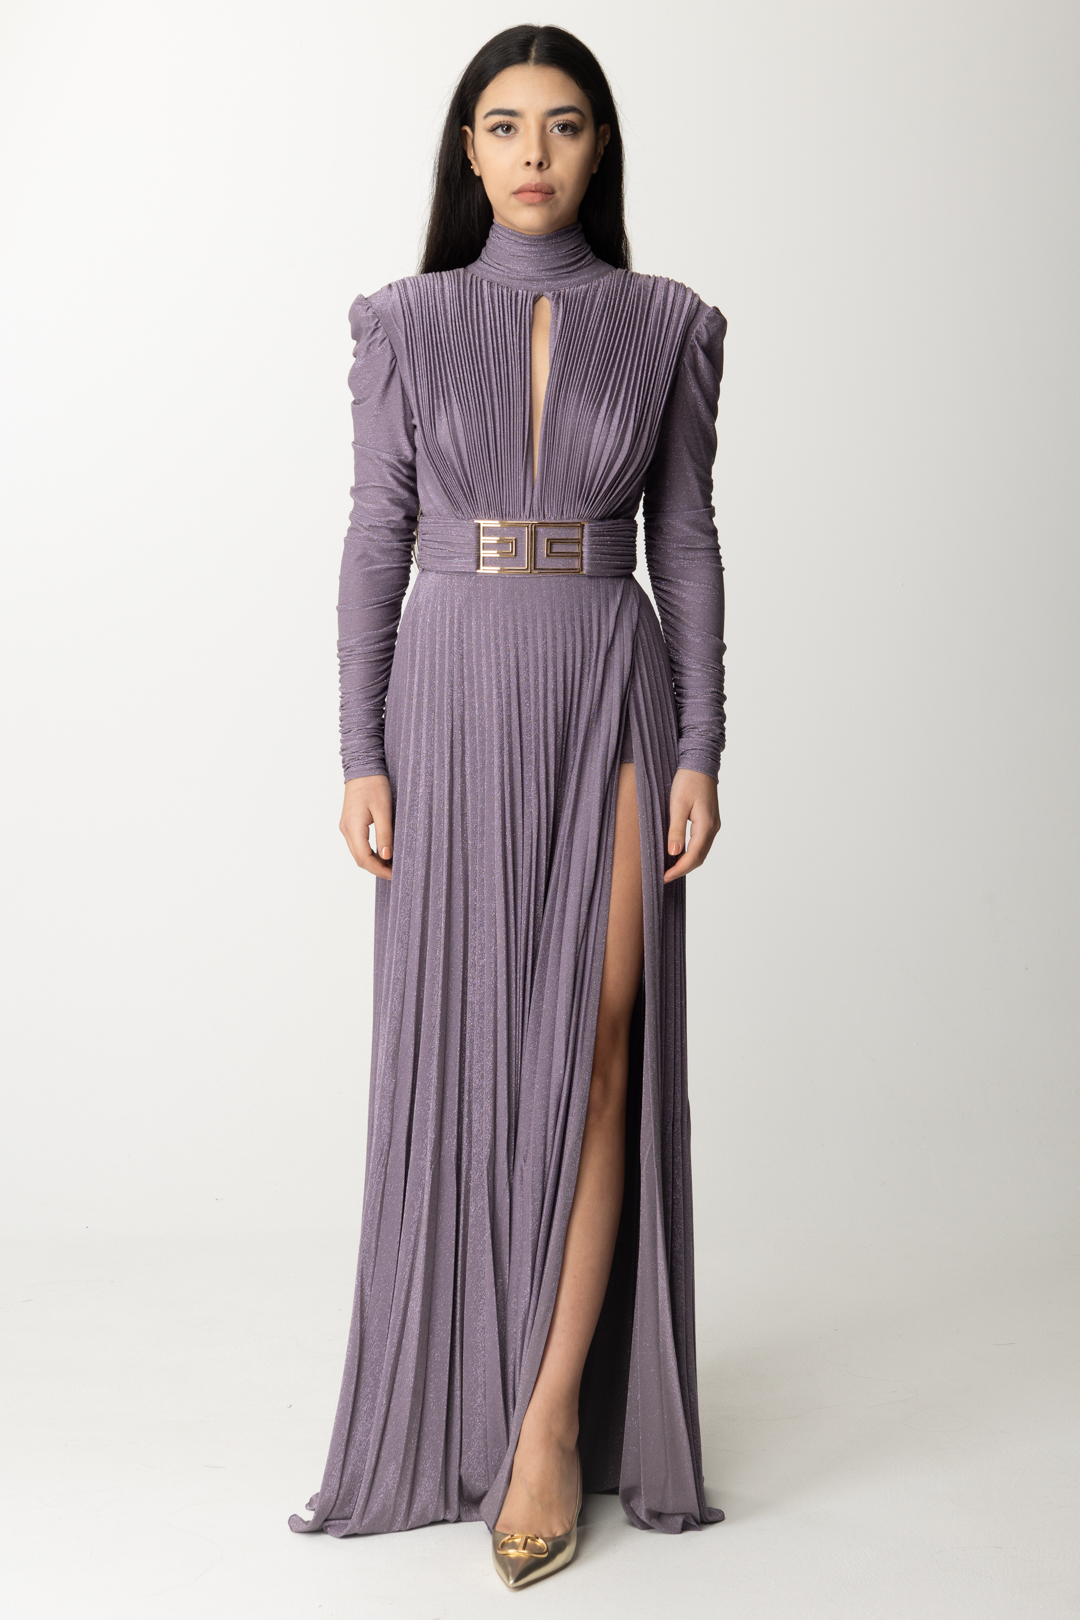 Preview: Elisabetta Franchi Red carpet dress in pleated lurex jersey CANDY VIOLET